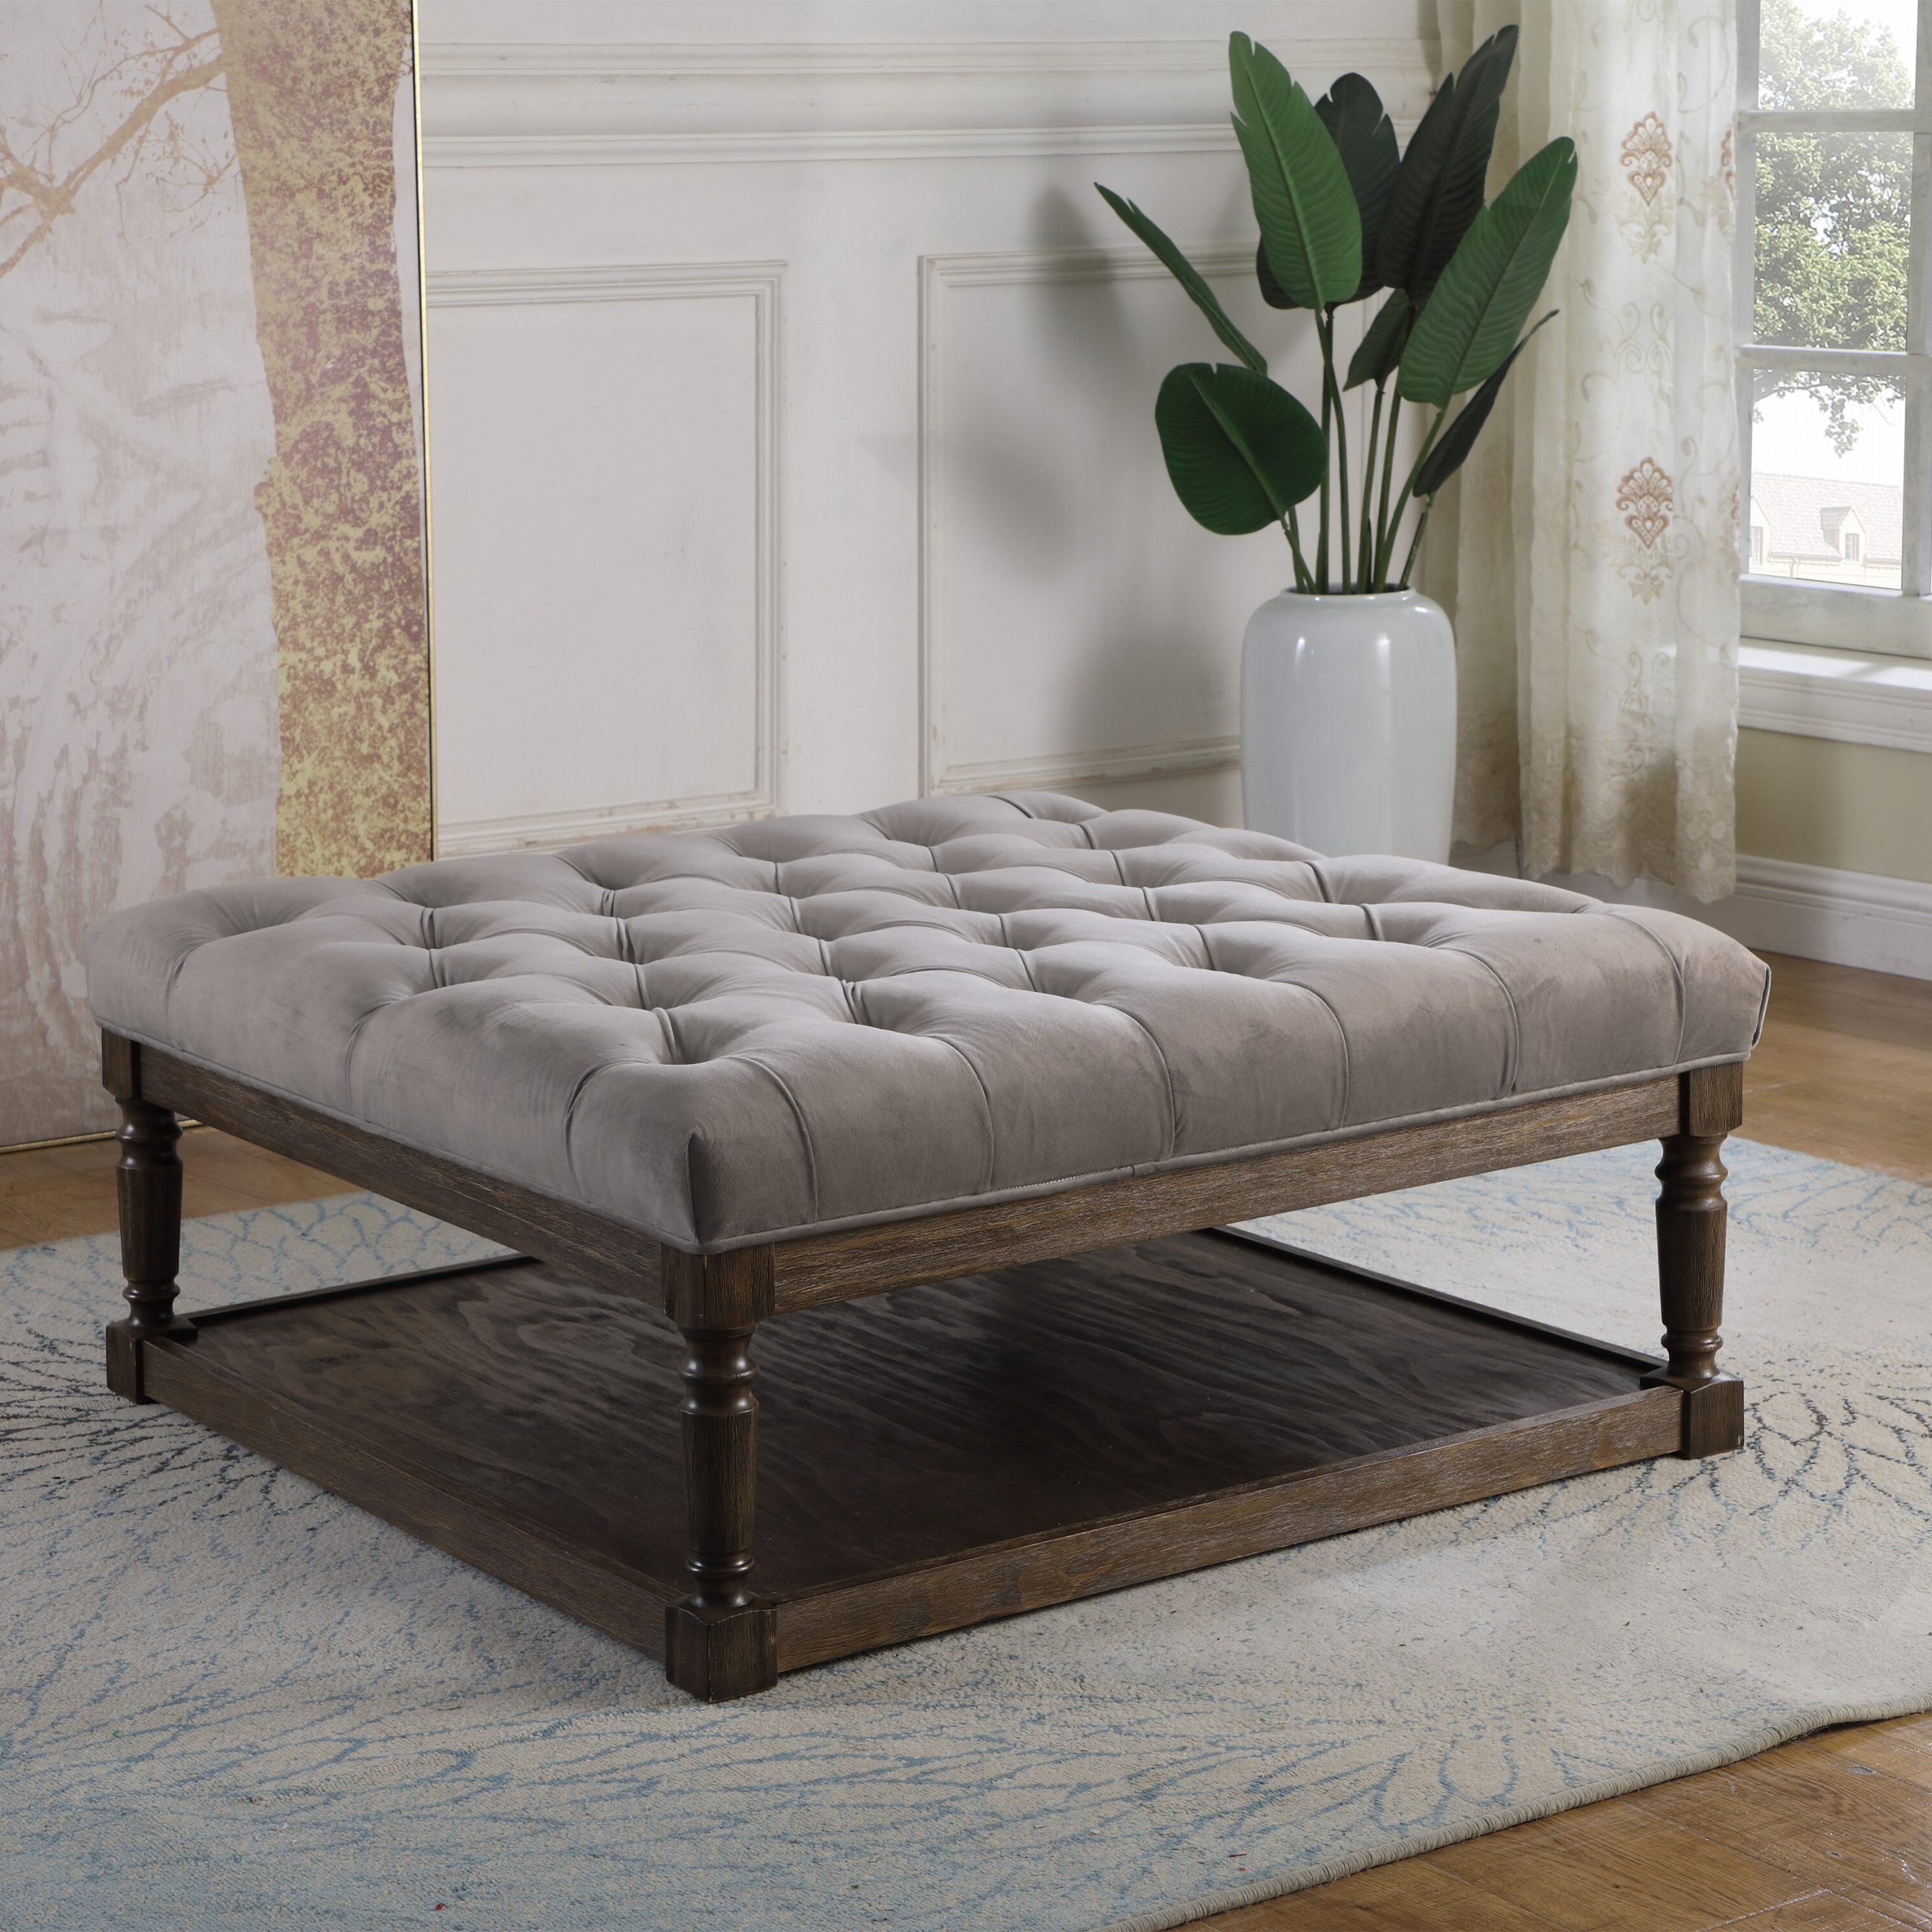 Alcott Hill® Kirkby Upholstered Ottoman & Reviews | Wayfair Within Upholstered Ottomans (View 5 of 15)